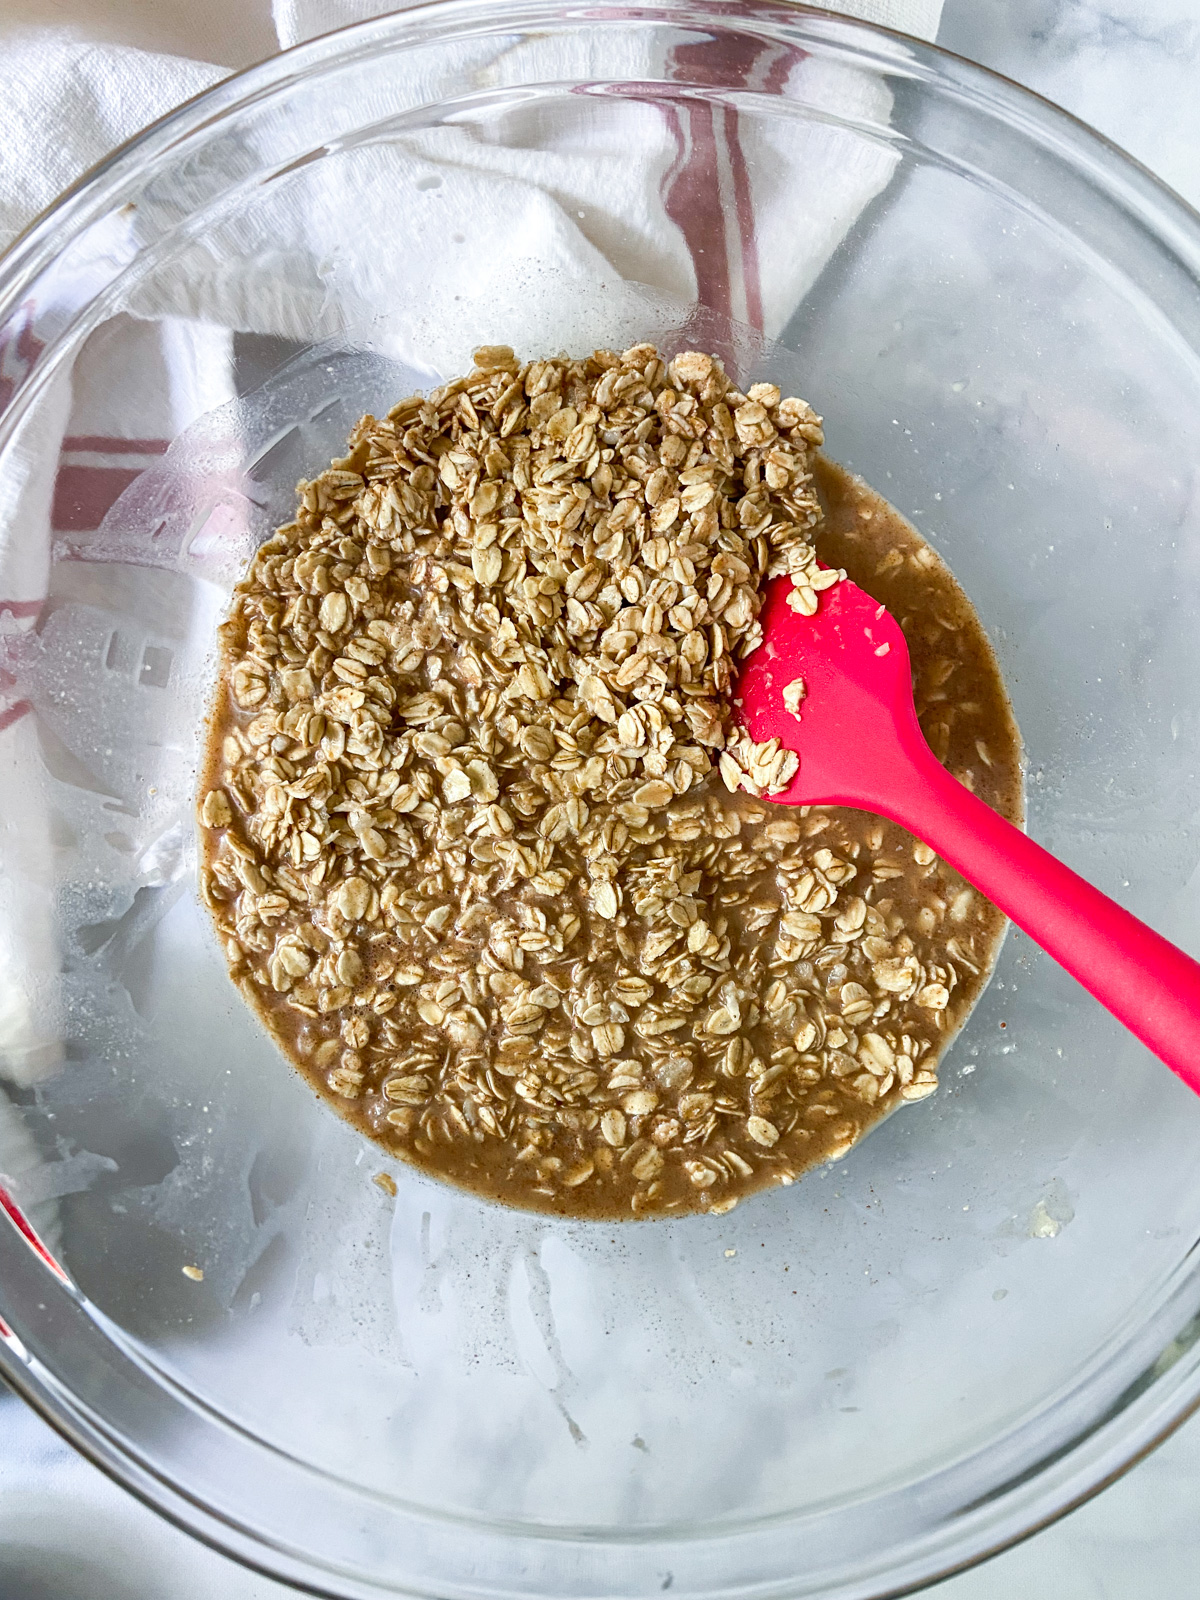 Oatmeal mixture with liquid ingredients stirred in.